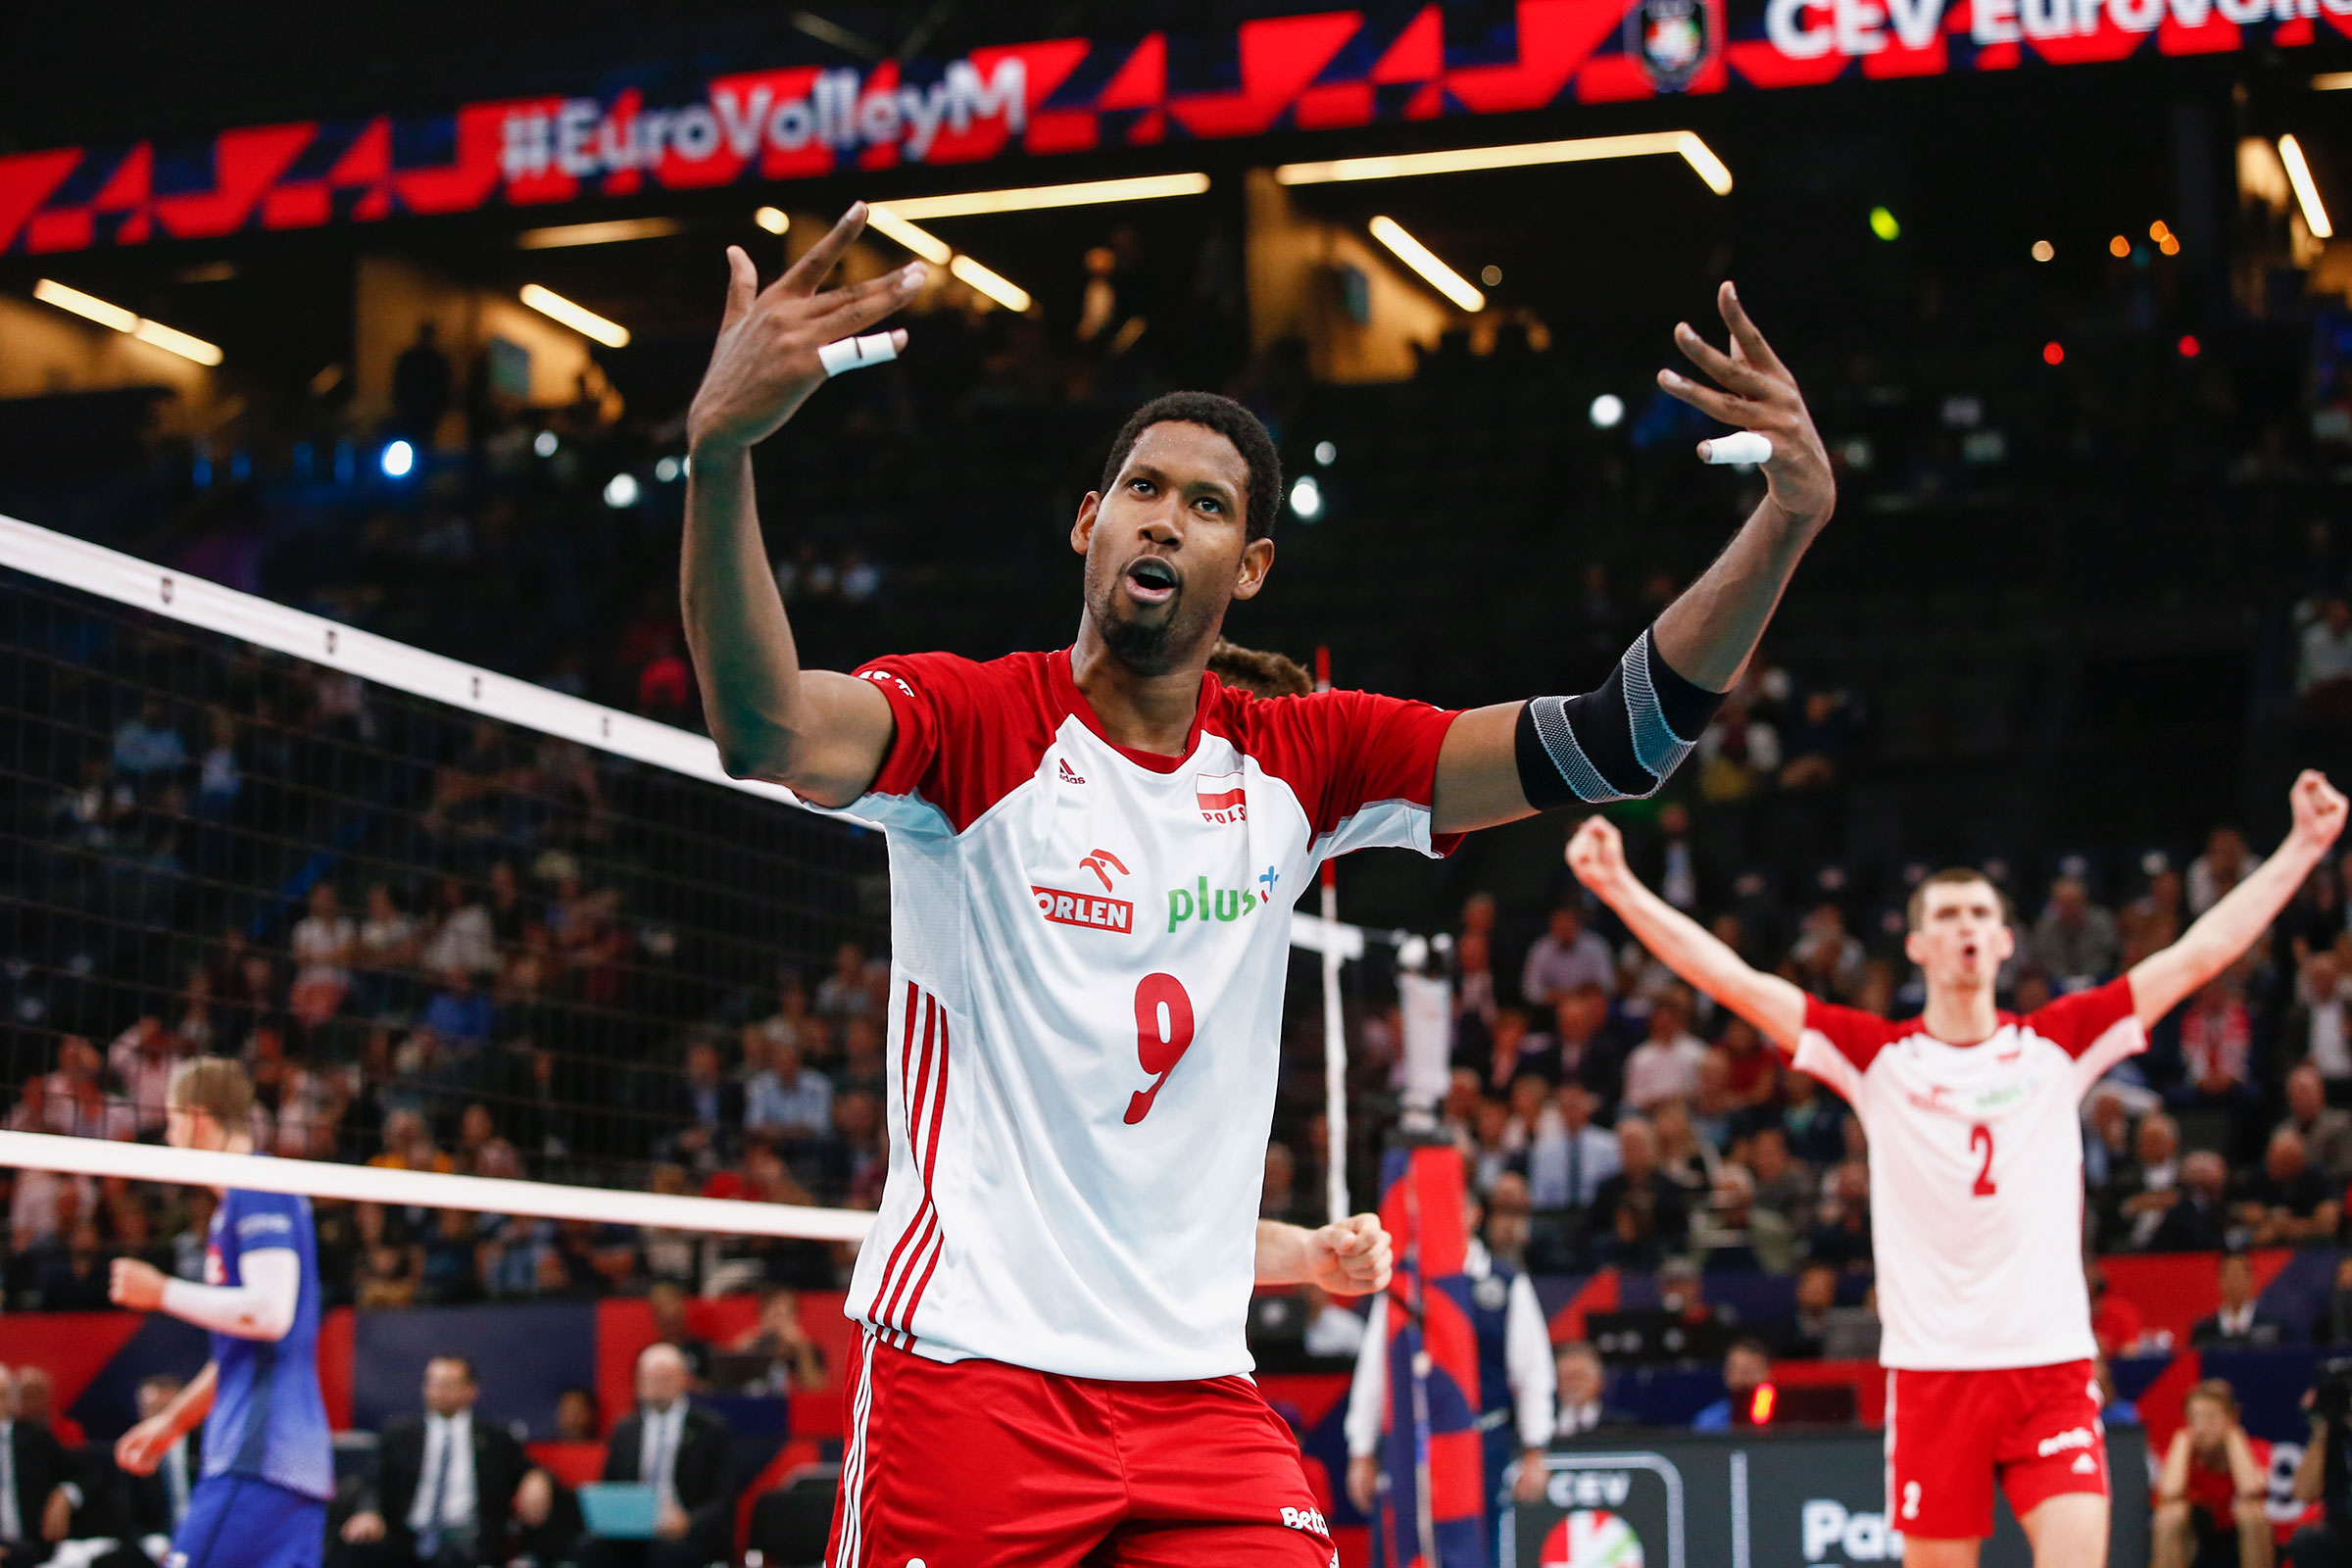 Wilfredo Leon Venero of Poland celebrates a point against France during EuroVolley on September 28, 2019 in Paris, France.